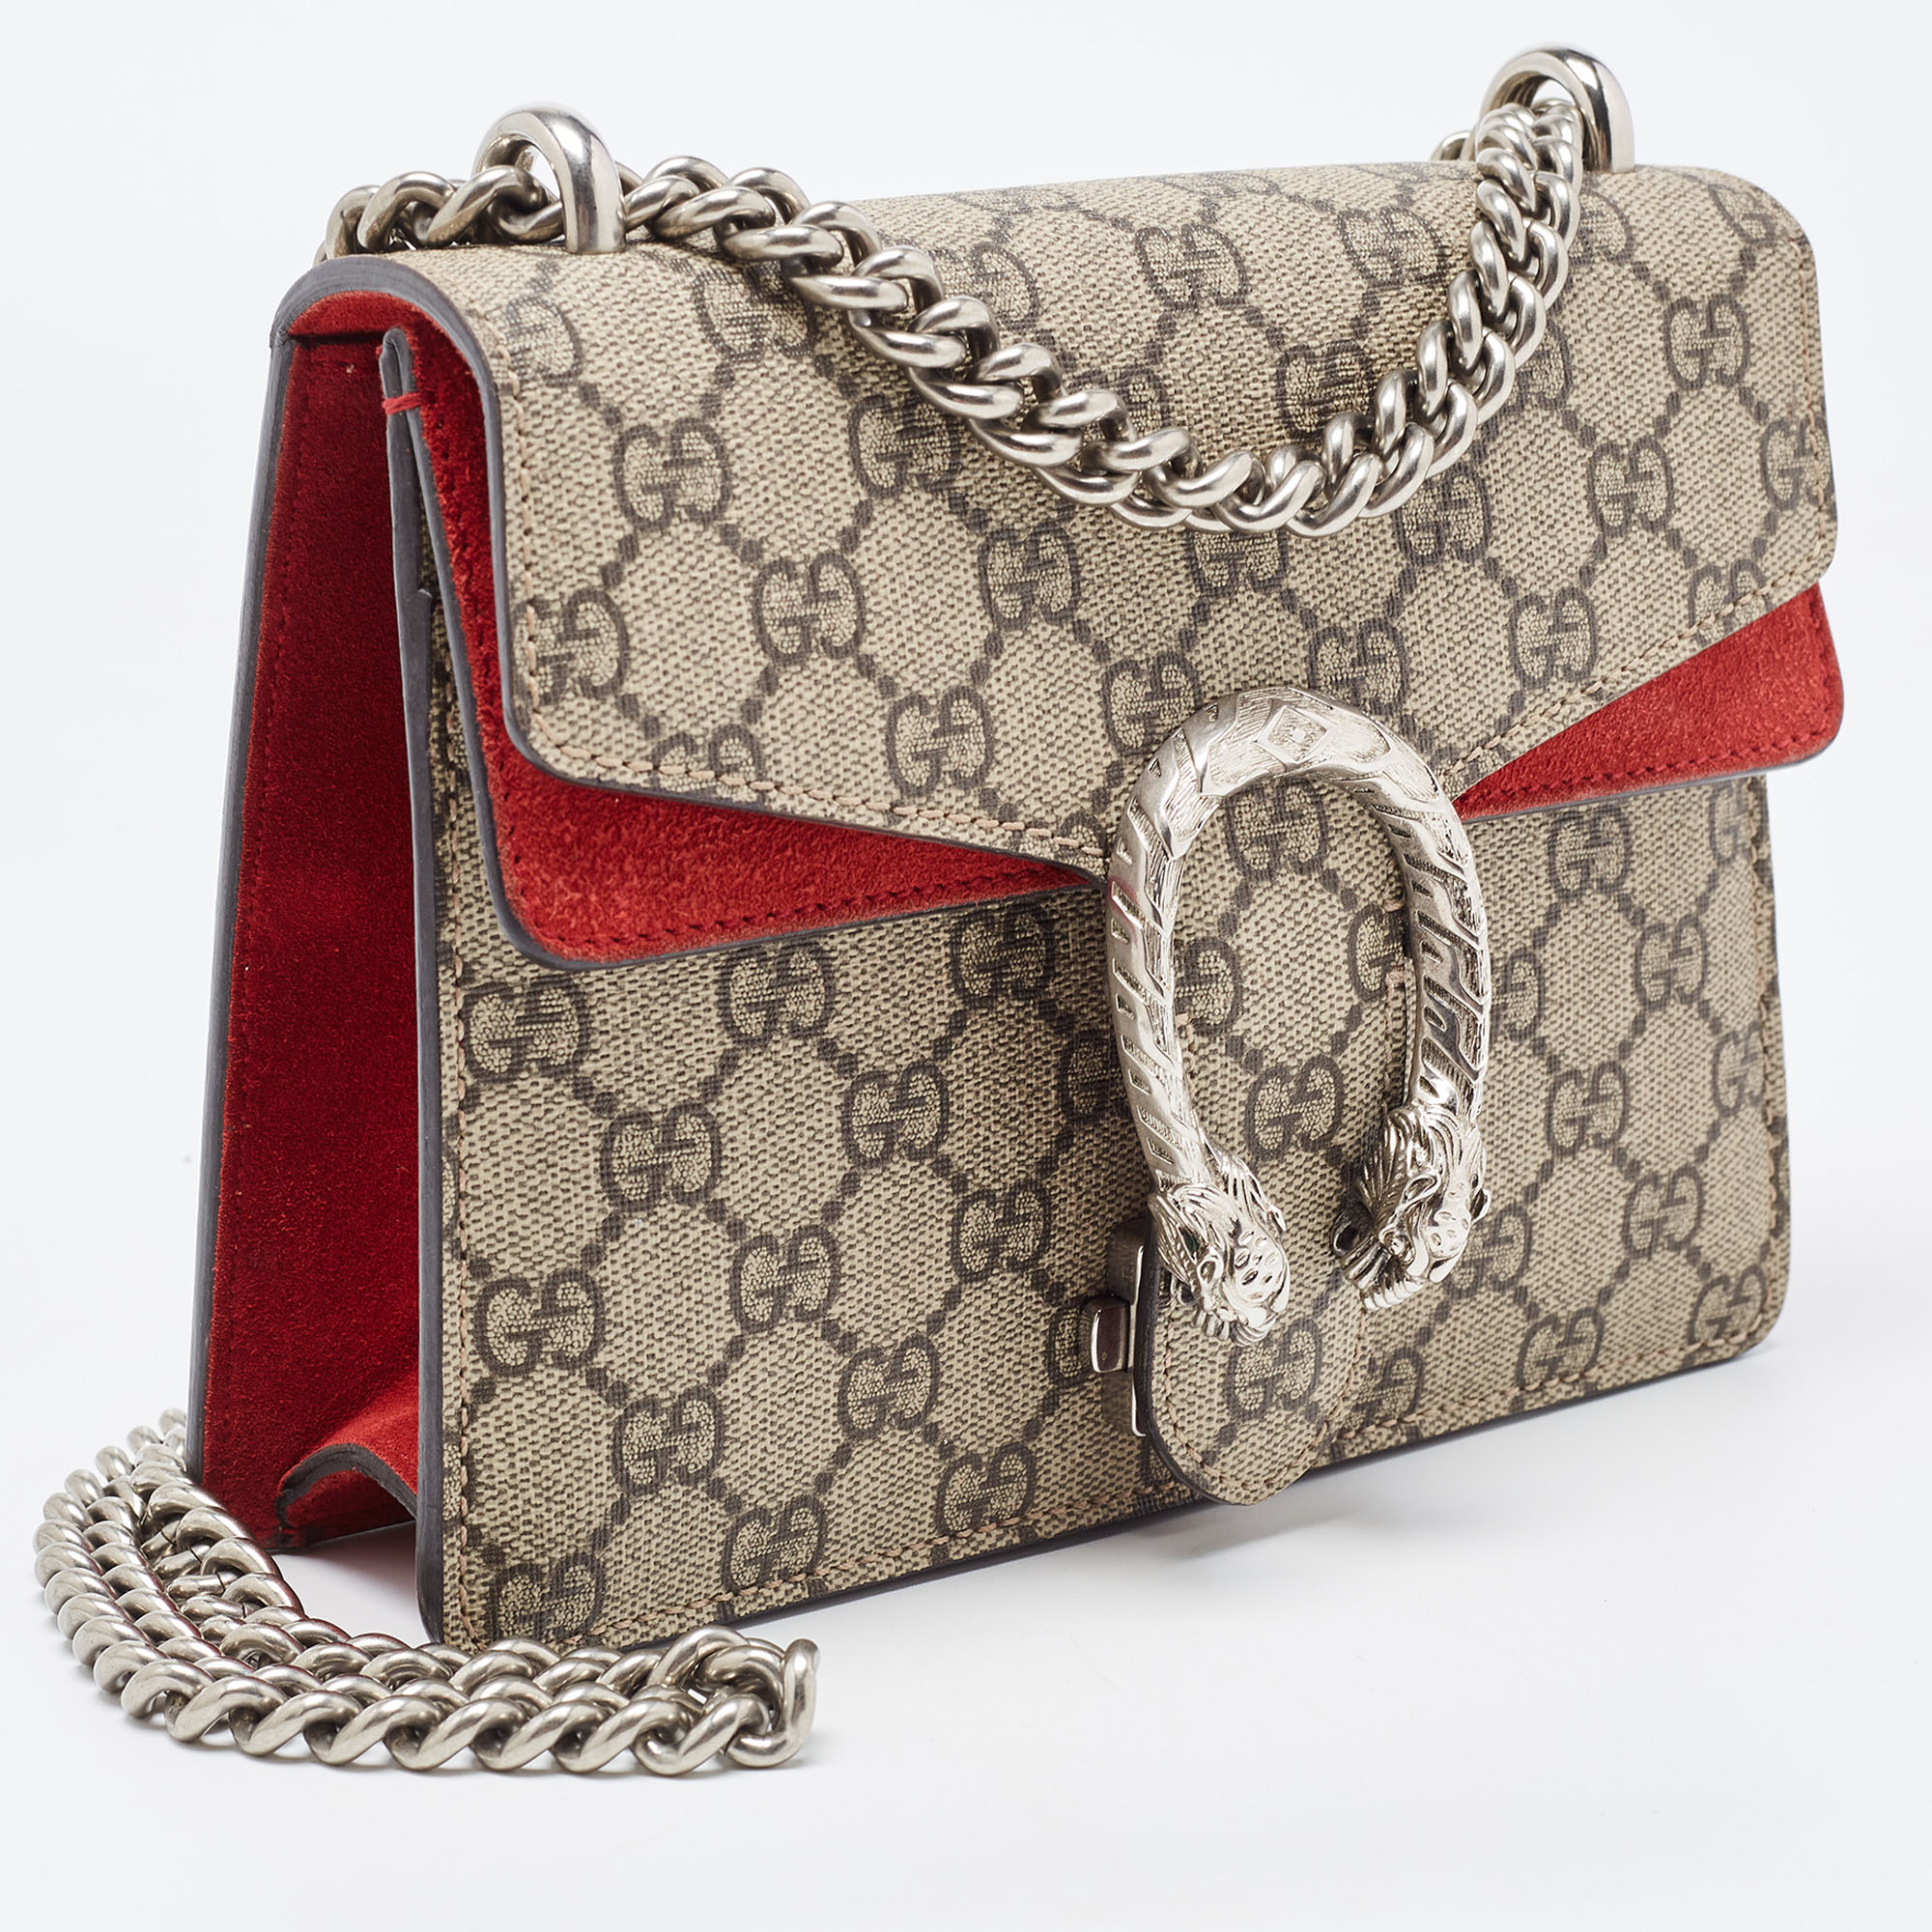 Gucci Red/Beige GG Supreme Canvas And Suede Mini Dionysus Shoulder Bag